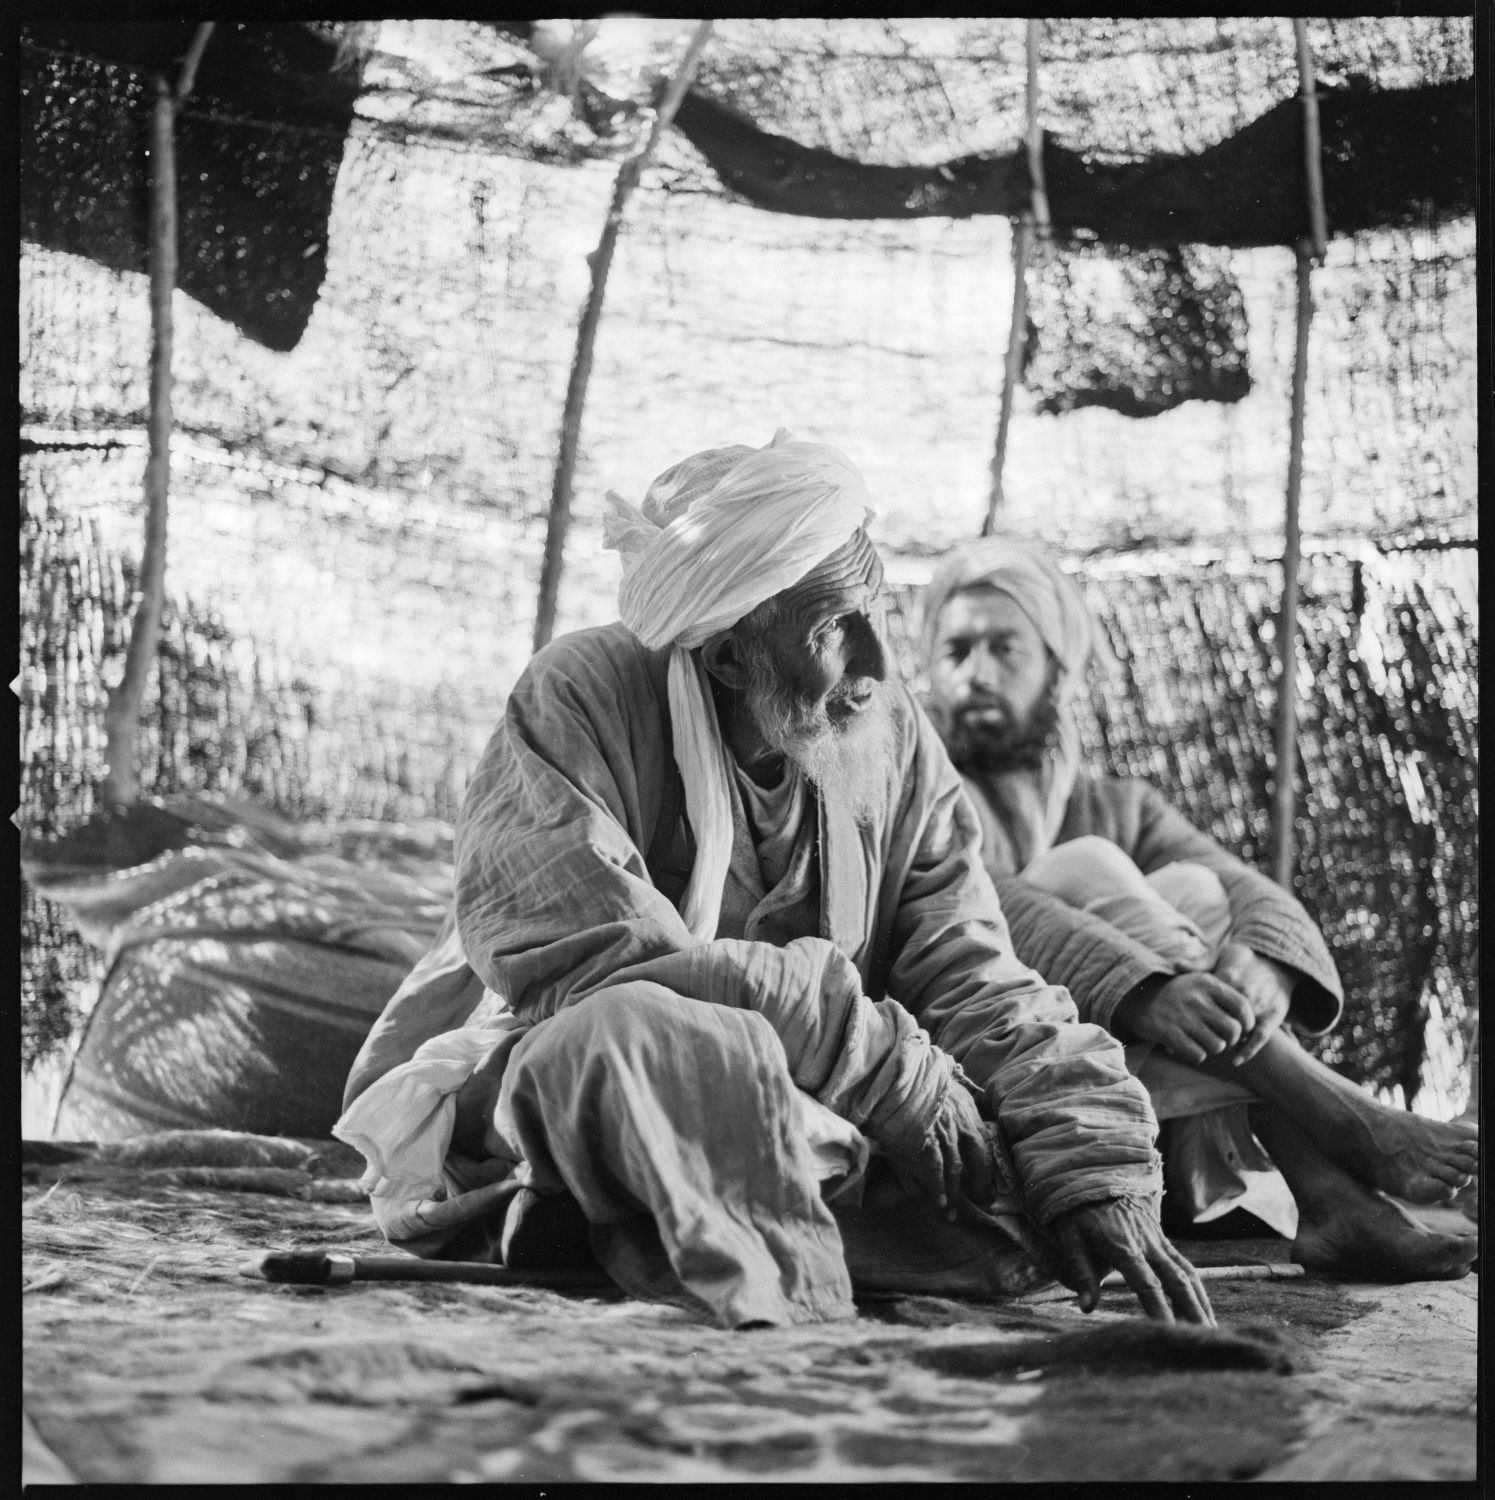 Men converse seated inside tent in the vicinity of Jam, Afghanistan.